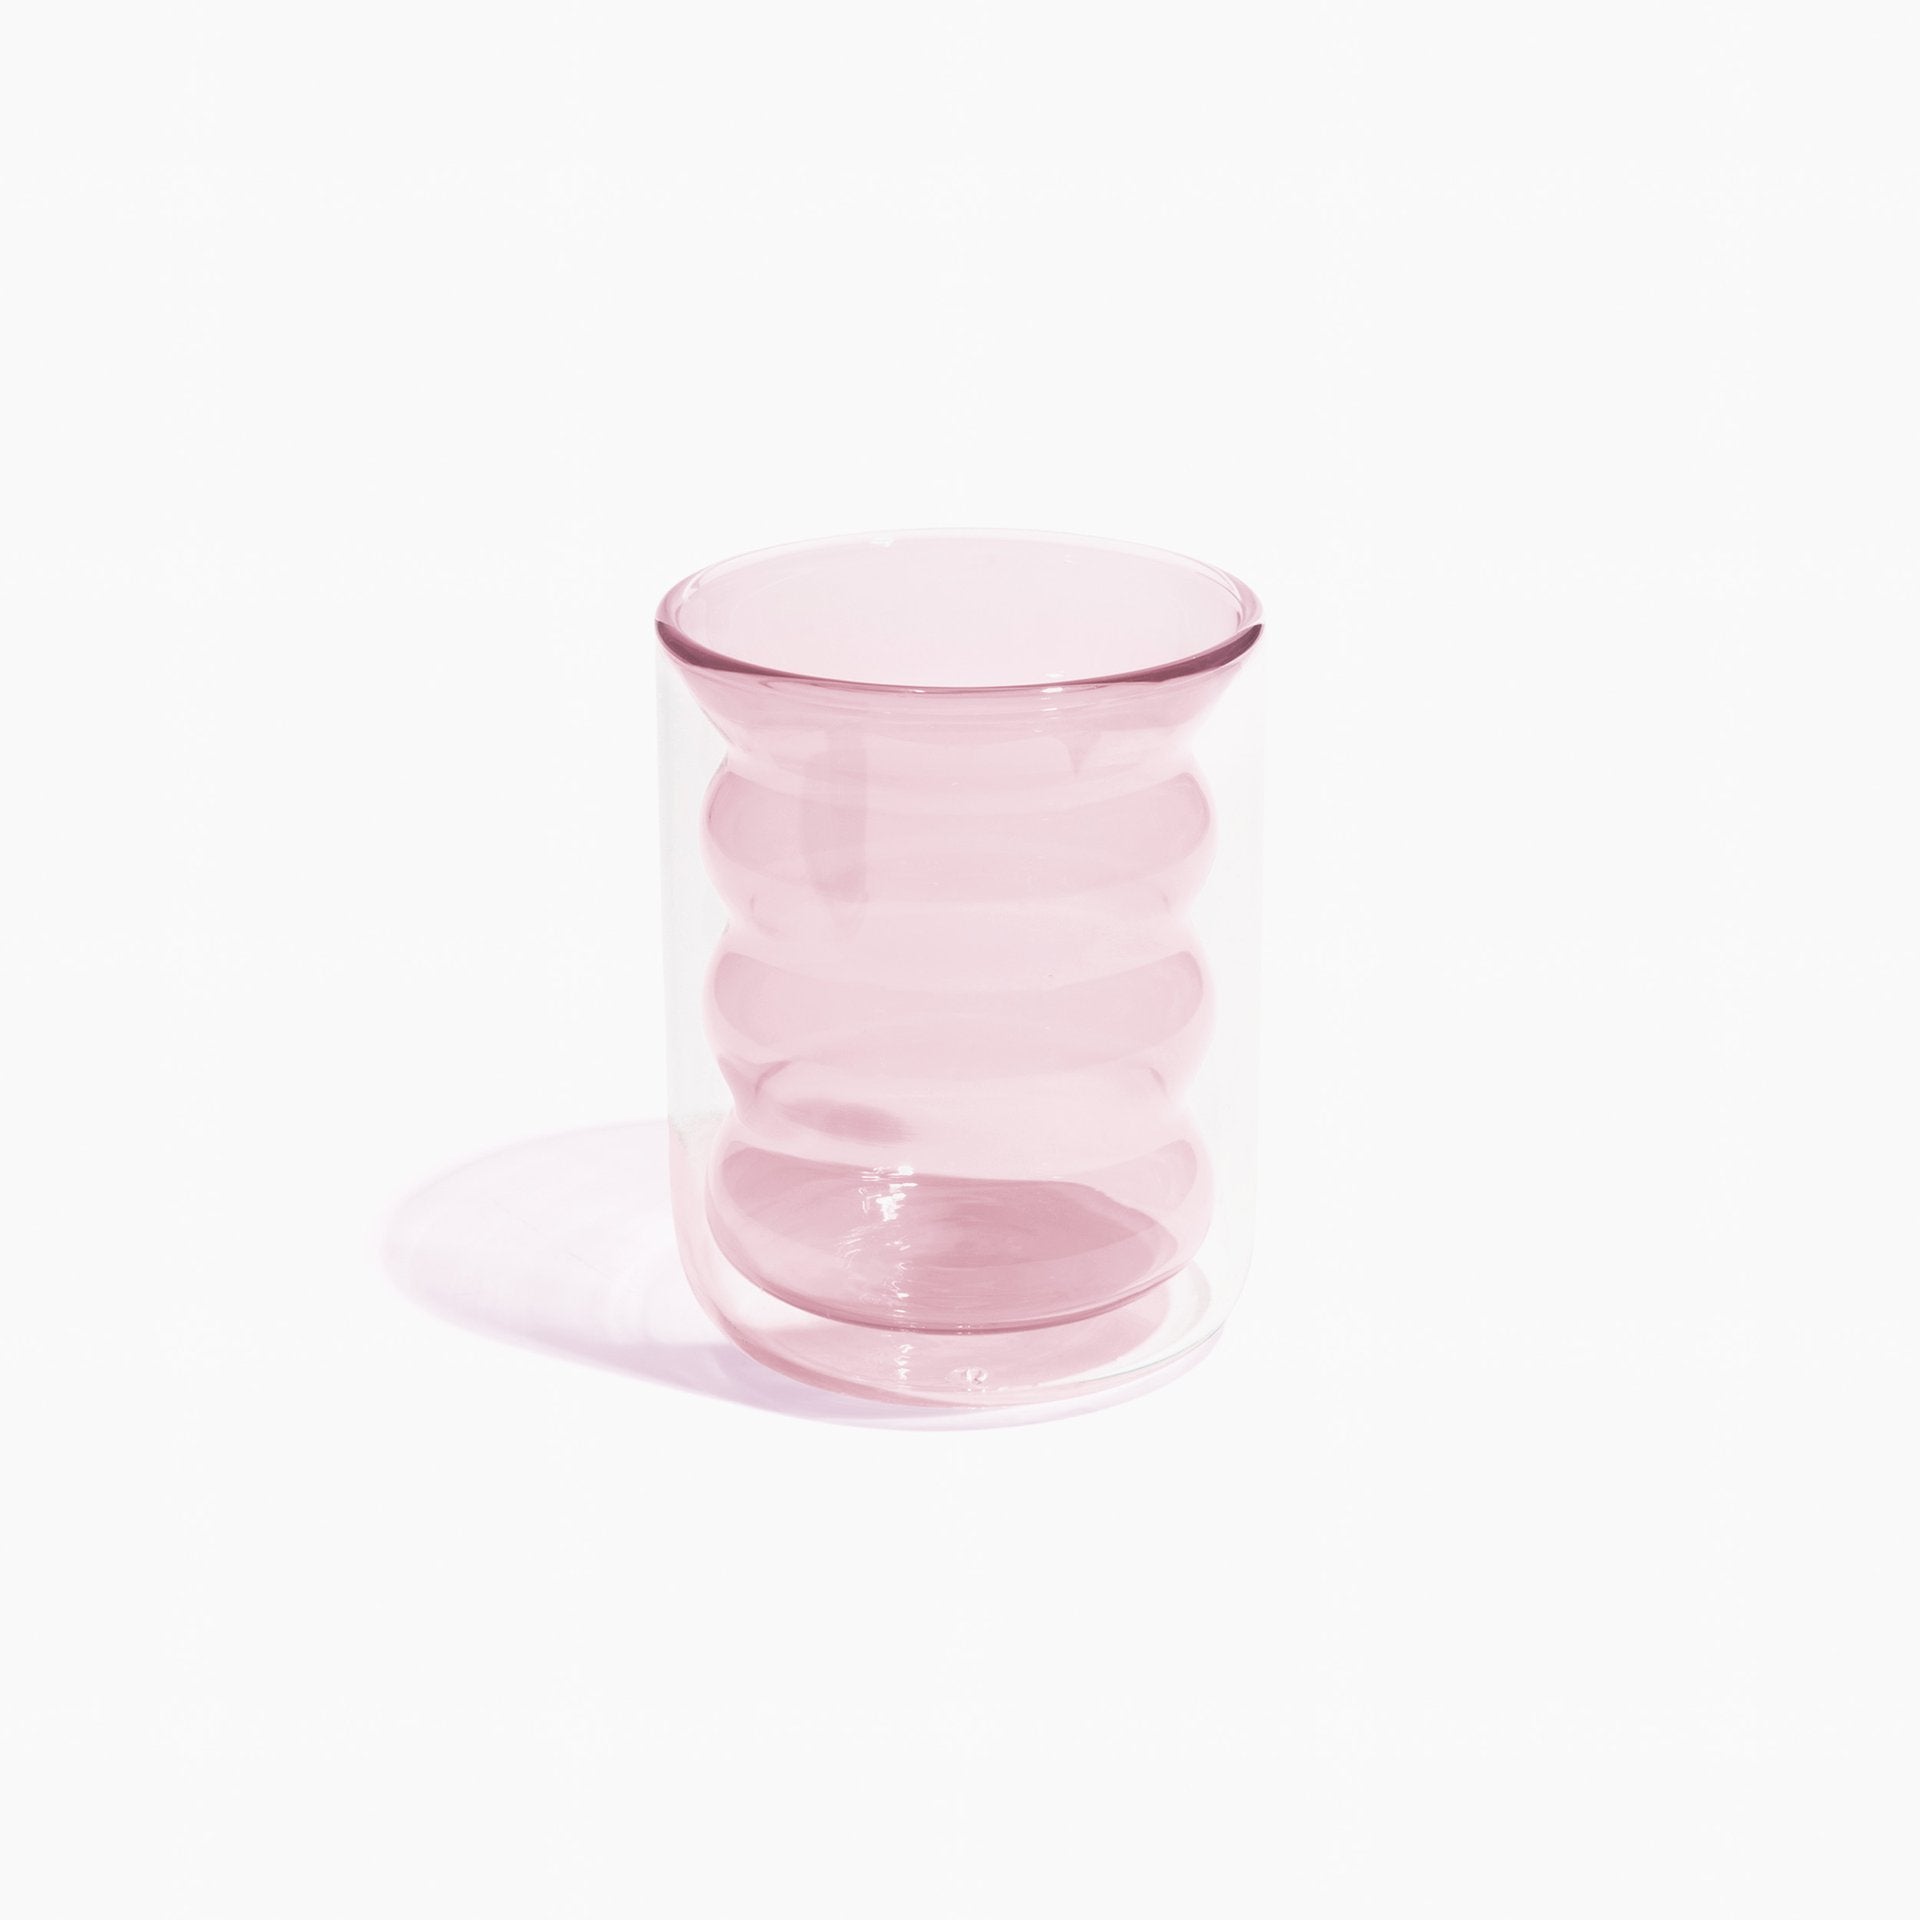 https://icastore.org/cdn/shop/products/Groovy-Cup-Pink_1920x_0d4660e6-812f-4ffa-b5f4-81f5a3575d15_1920x.jpg?v=1637163635